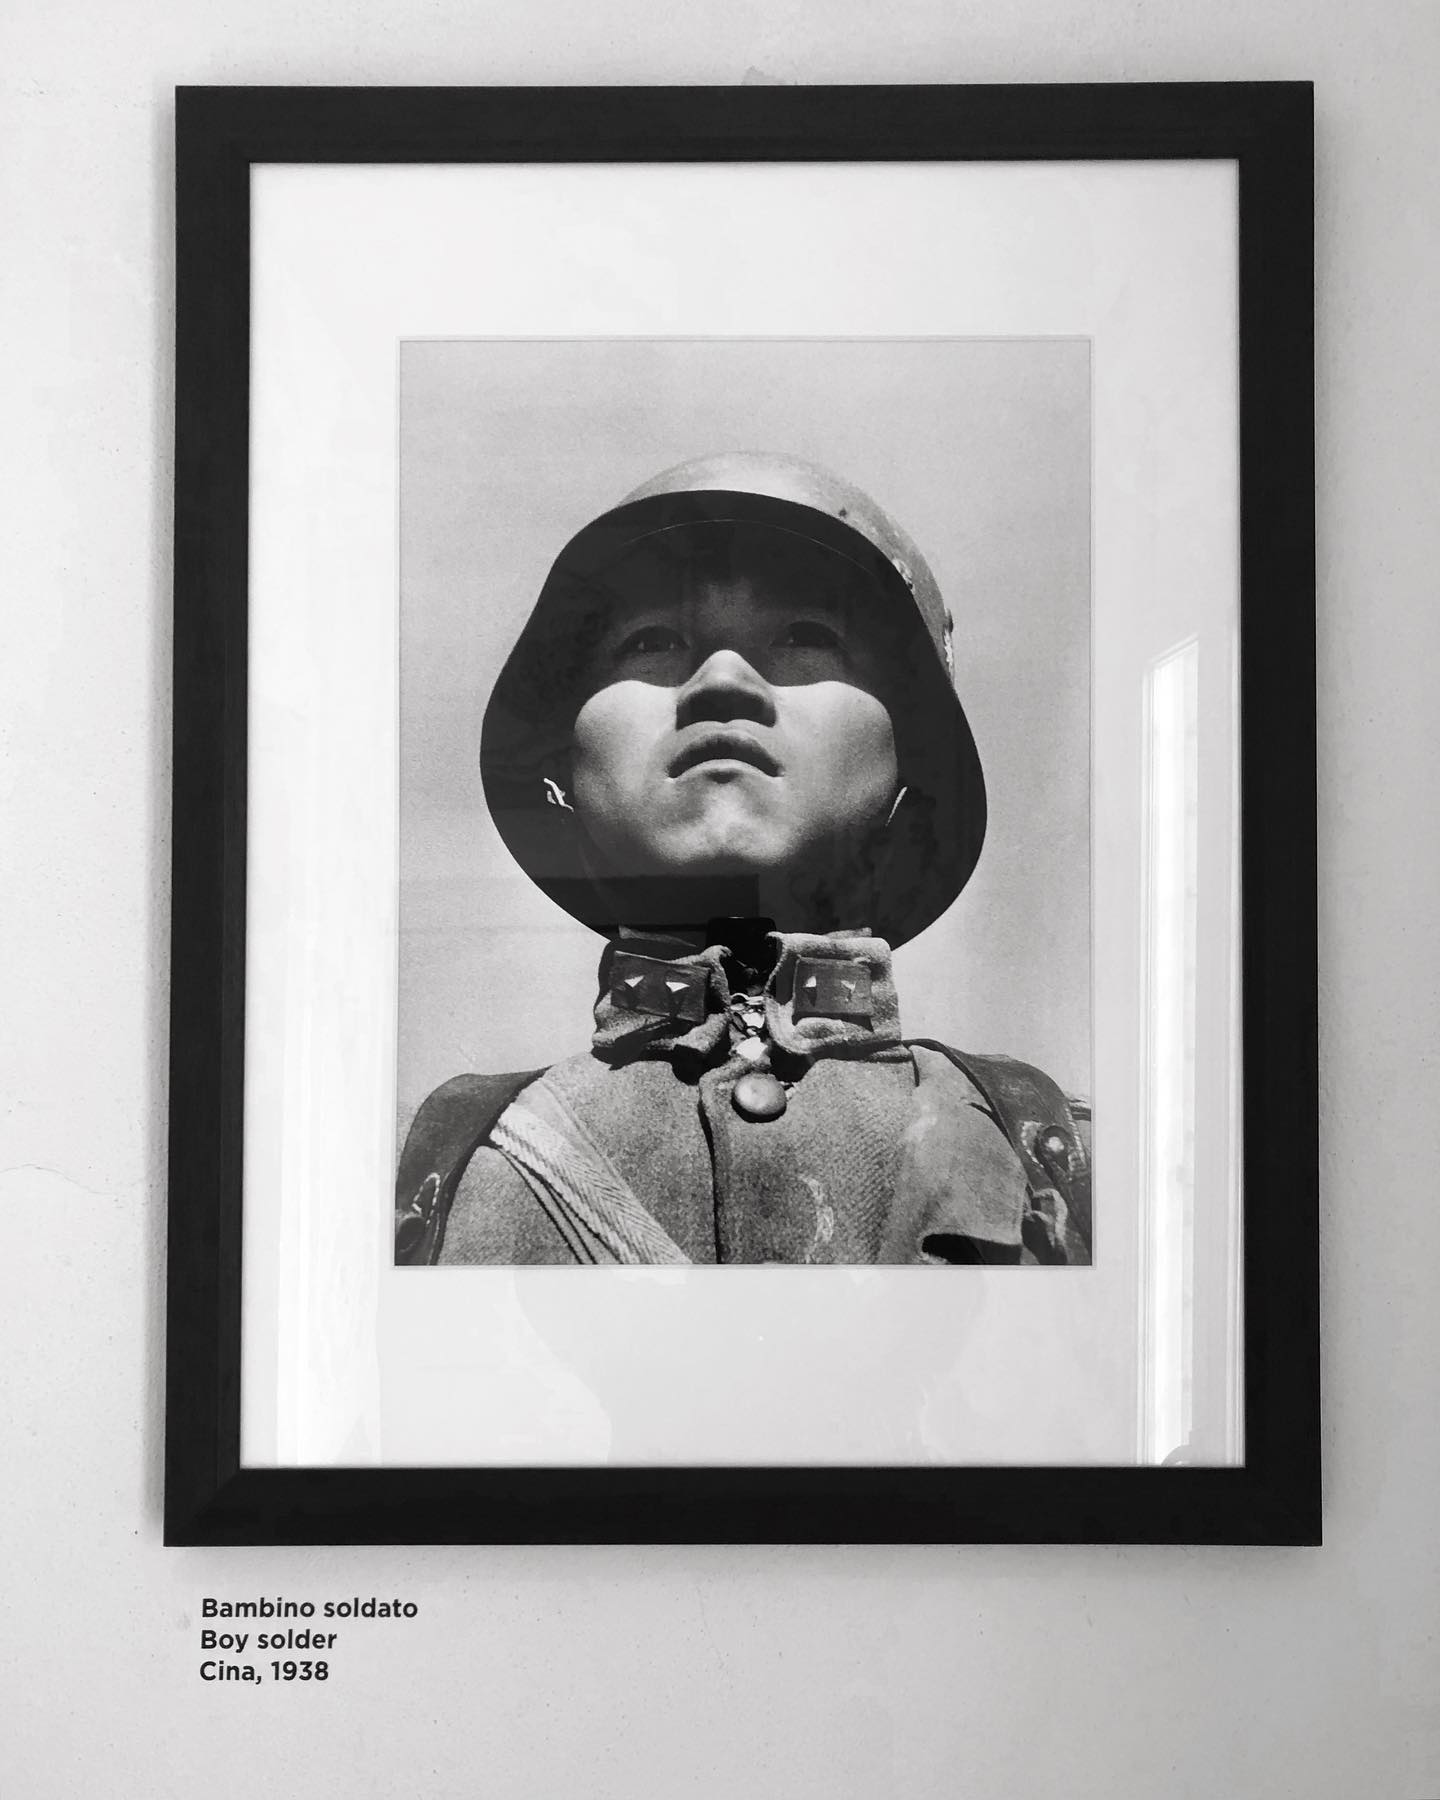 Have I said it yet today?
FUCK WAR.
.
“I hope to be unemployed as a war photographer until the end of my days” - Robert Capa, 1945.
.
Now showing at Villa Bassi @museovillabassi in Abano Terme.
.
#fuckwar #fuckputin #robertcapa #photography #inspiration #mastersofphotography #magnumphotos #soldier #history #bw #filmphotography #inspiration #fuckviolence #fuckwarculture